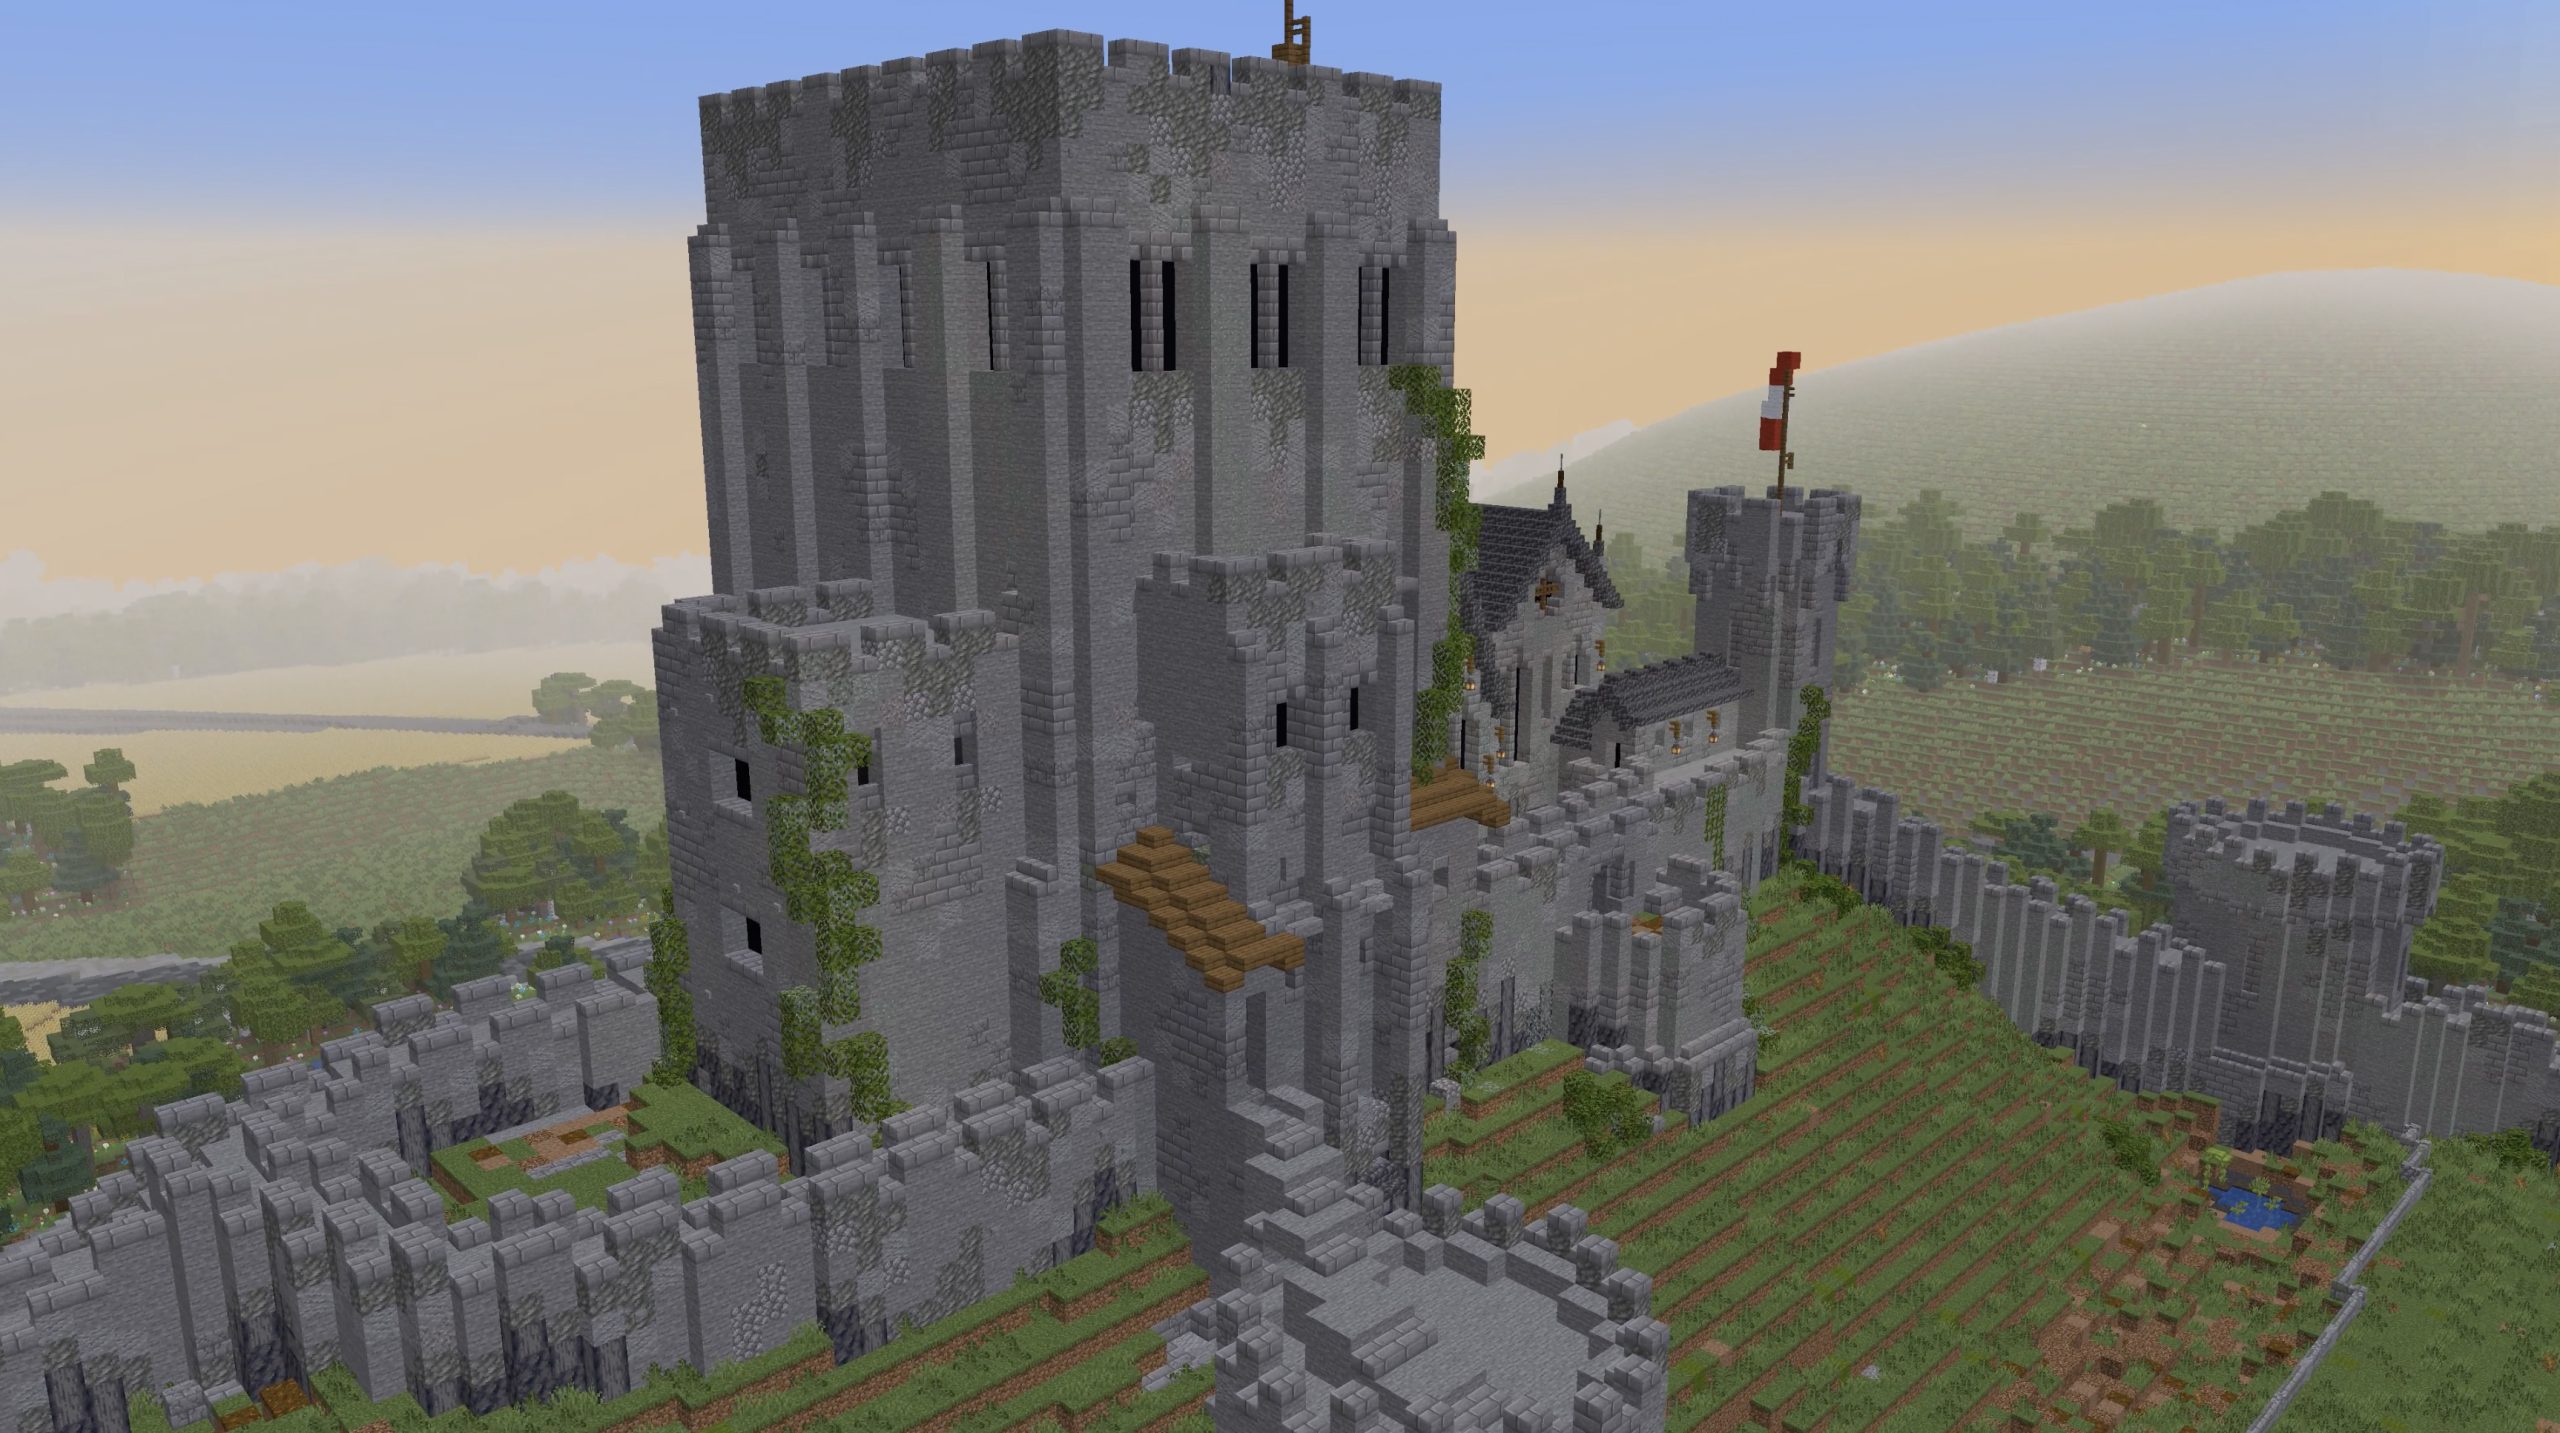 Corfe Castle, recreated stone by stone in Minecraft